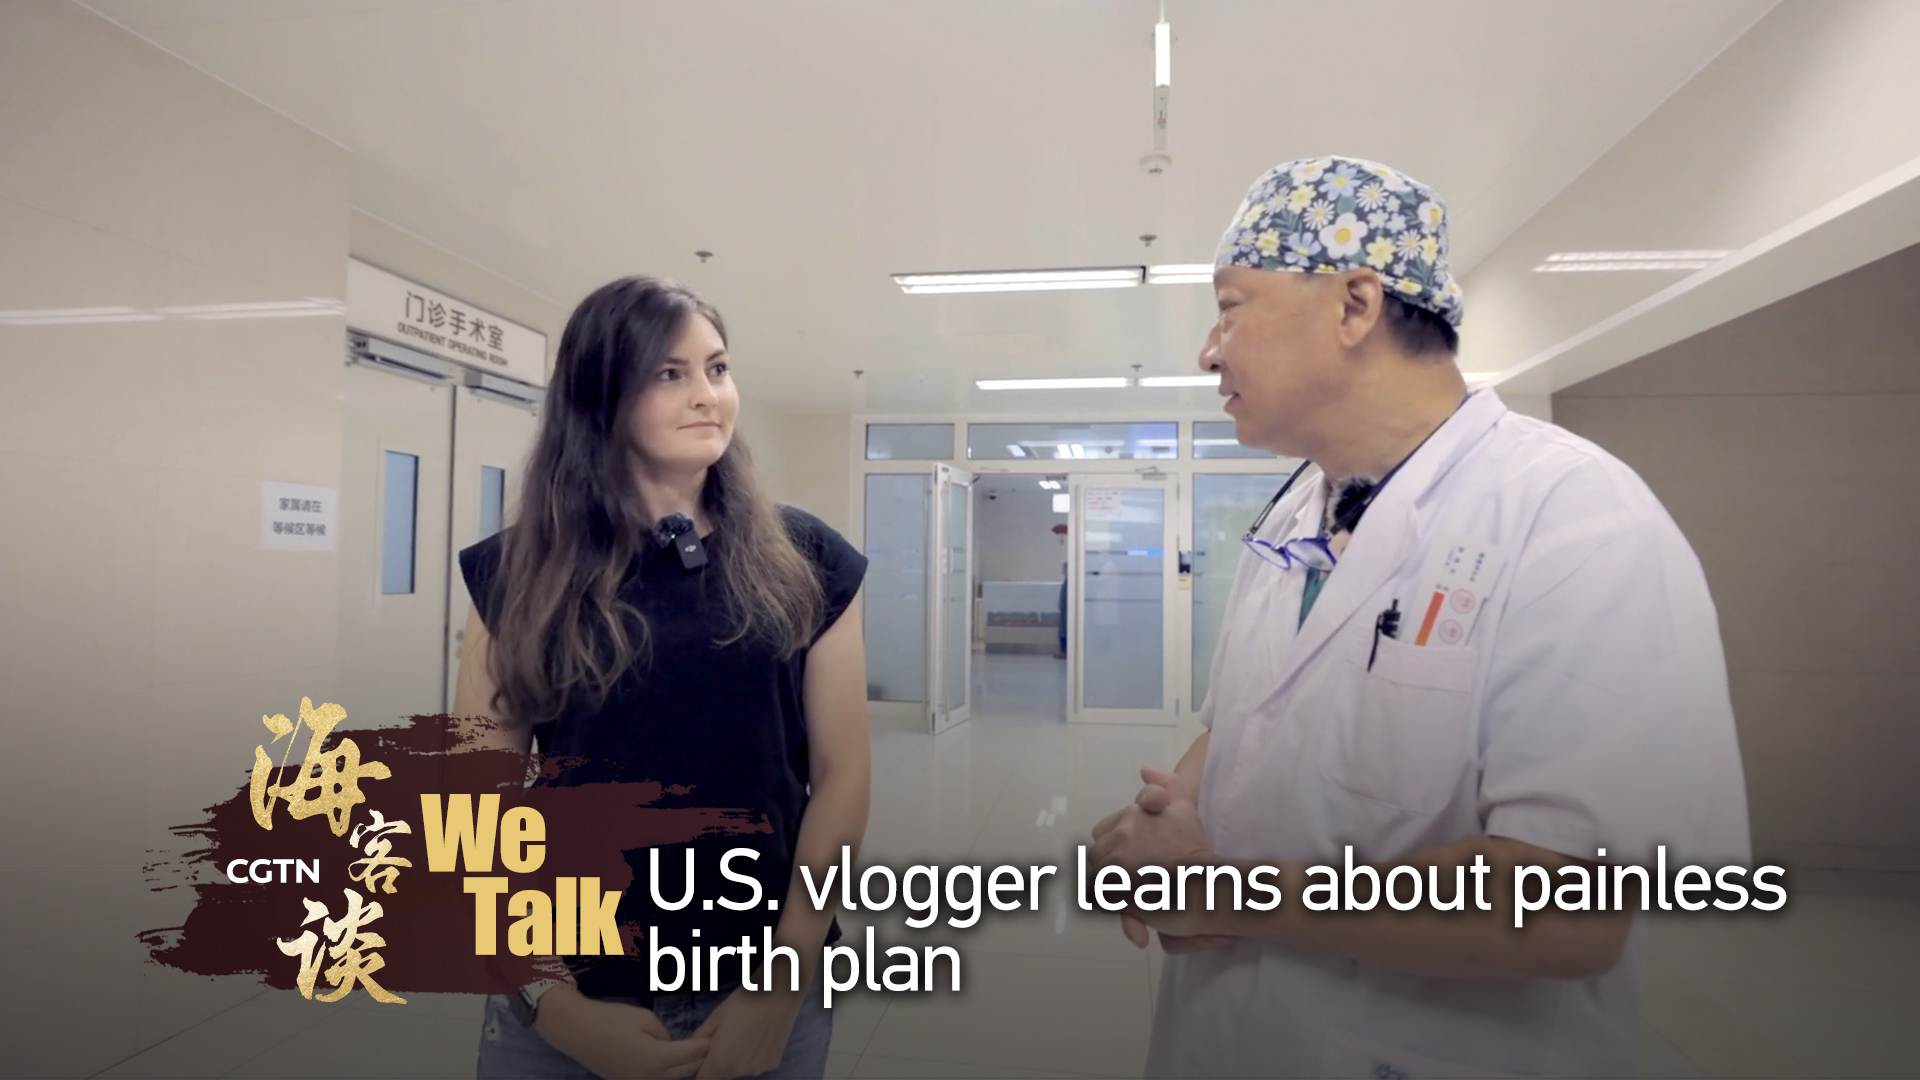 We Talk: U.S. vlogger learns about painless birth plan